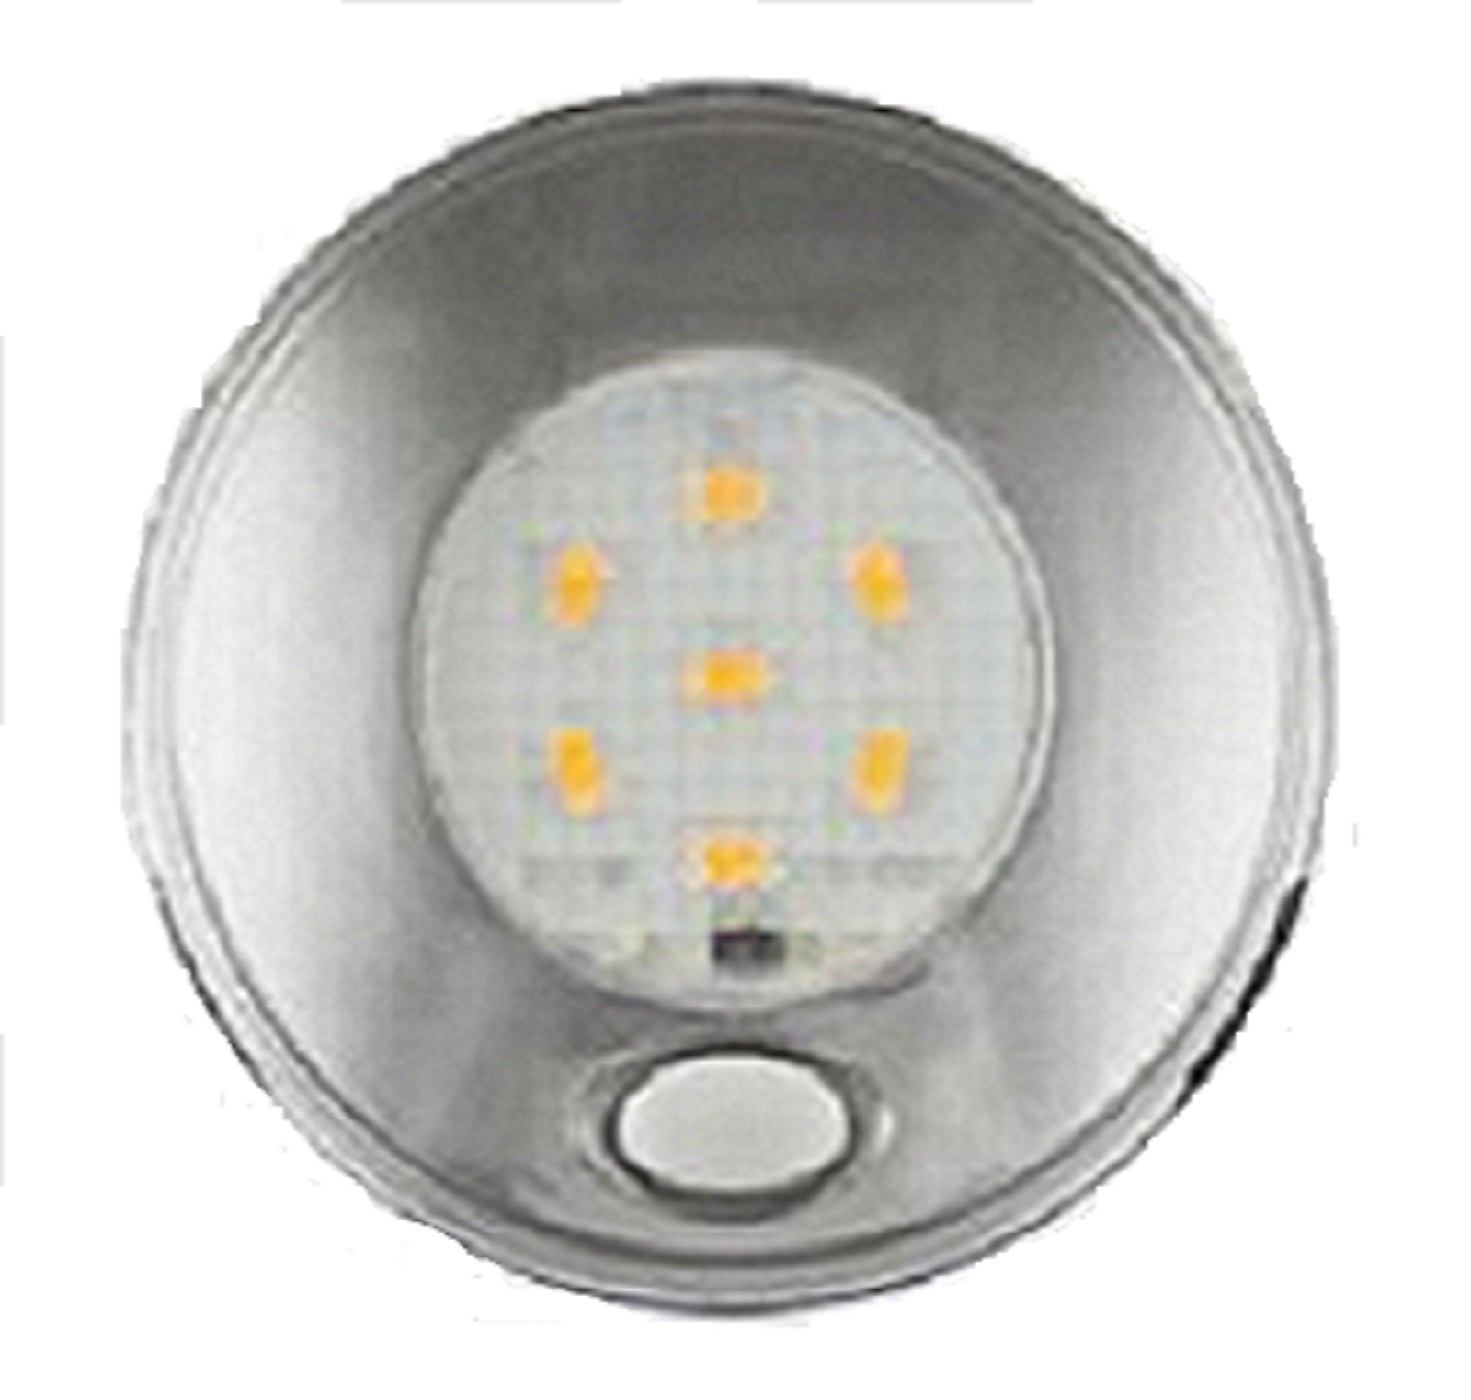 LED Autolamps Round Interior Lamps 79mm with Switch